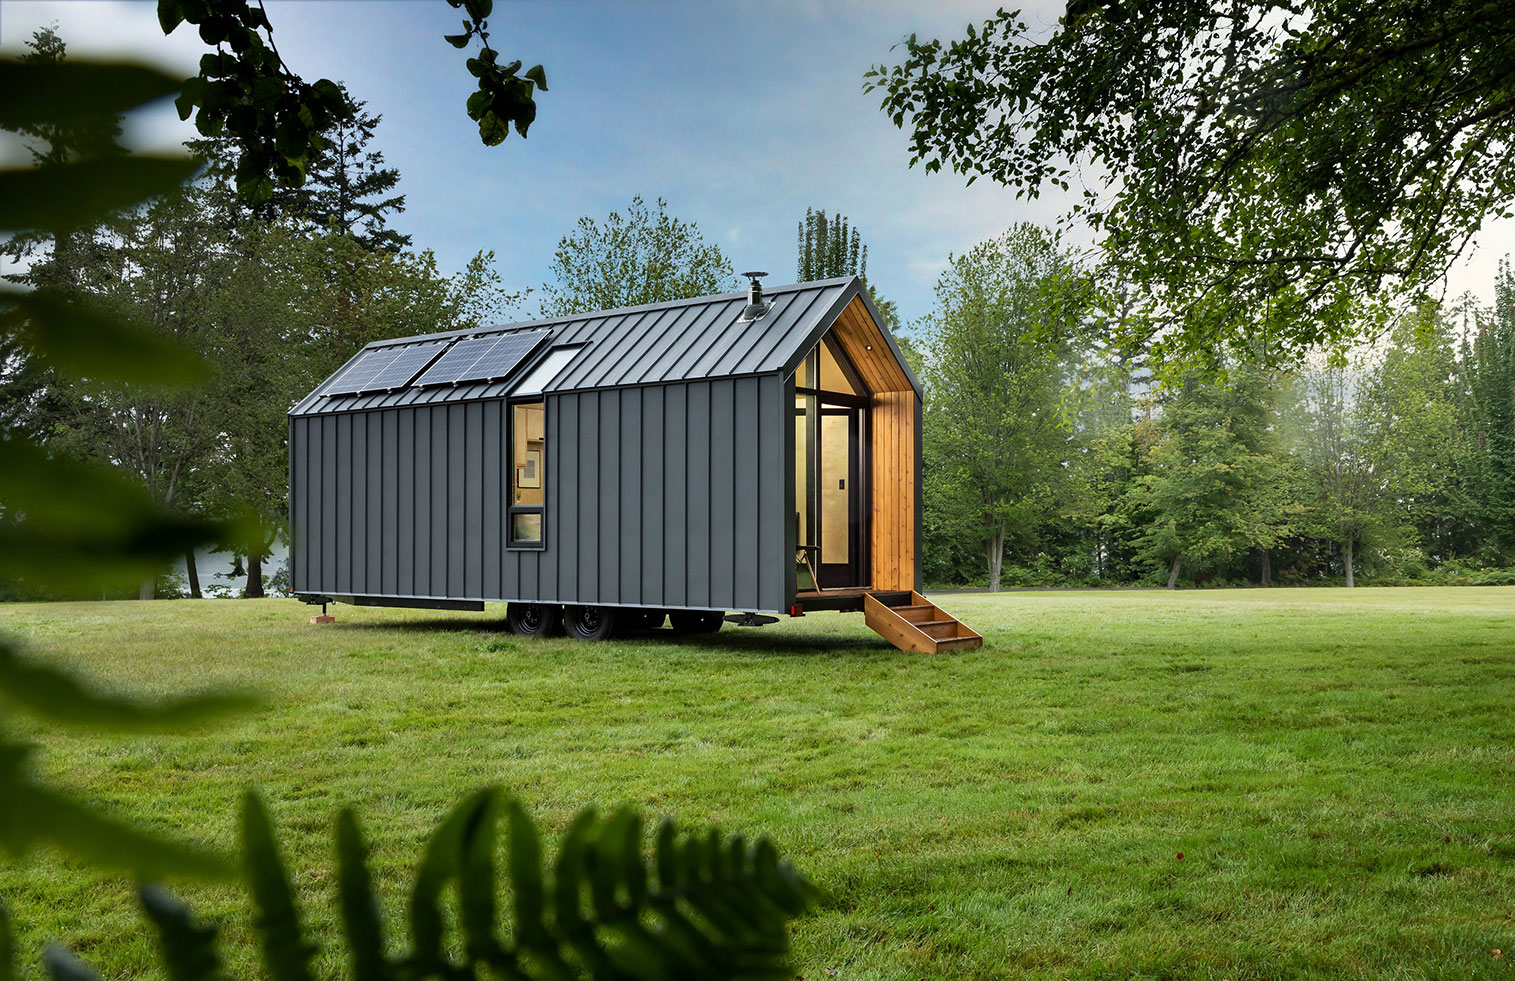 Modern Shed has released a towable prefab cabin, complete with a gable roof and wood-burning stove